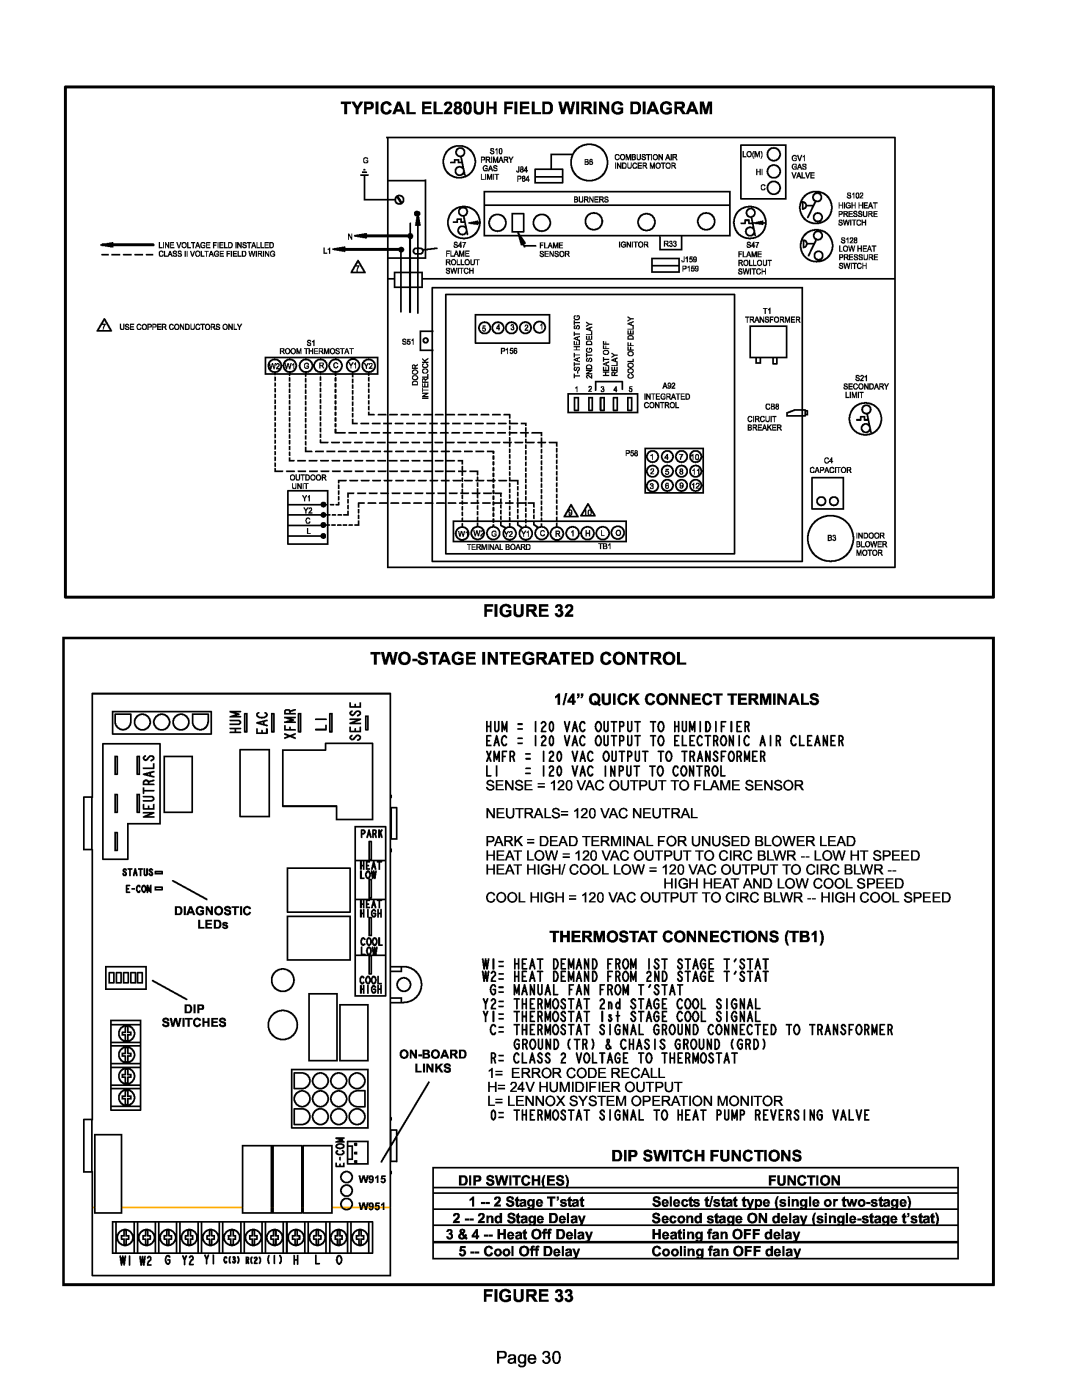 Lennox International Inc TYPICAL EL280UH FIELD WIRING DIAGRAM, Figure Two−Stage Integrated Control, FIGURE Page 